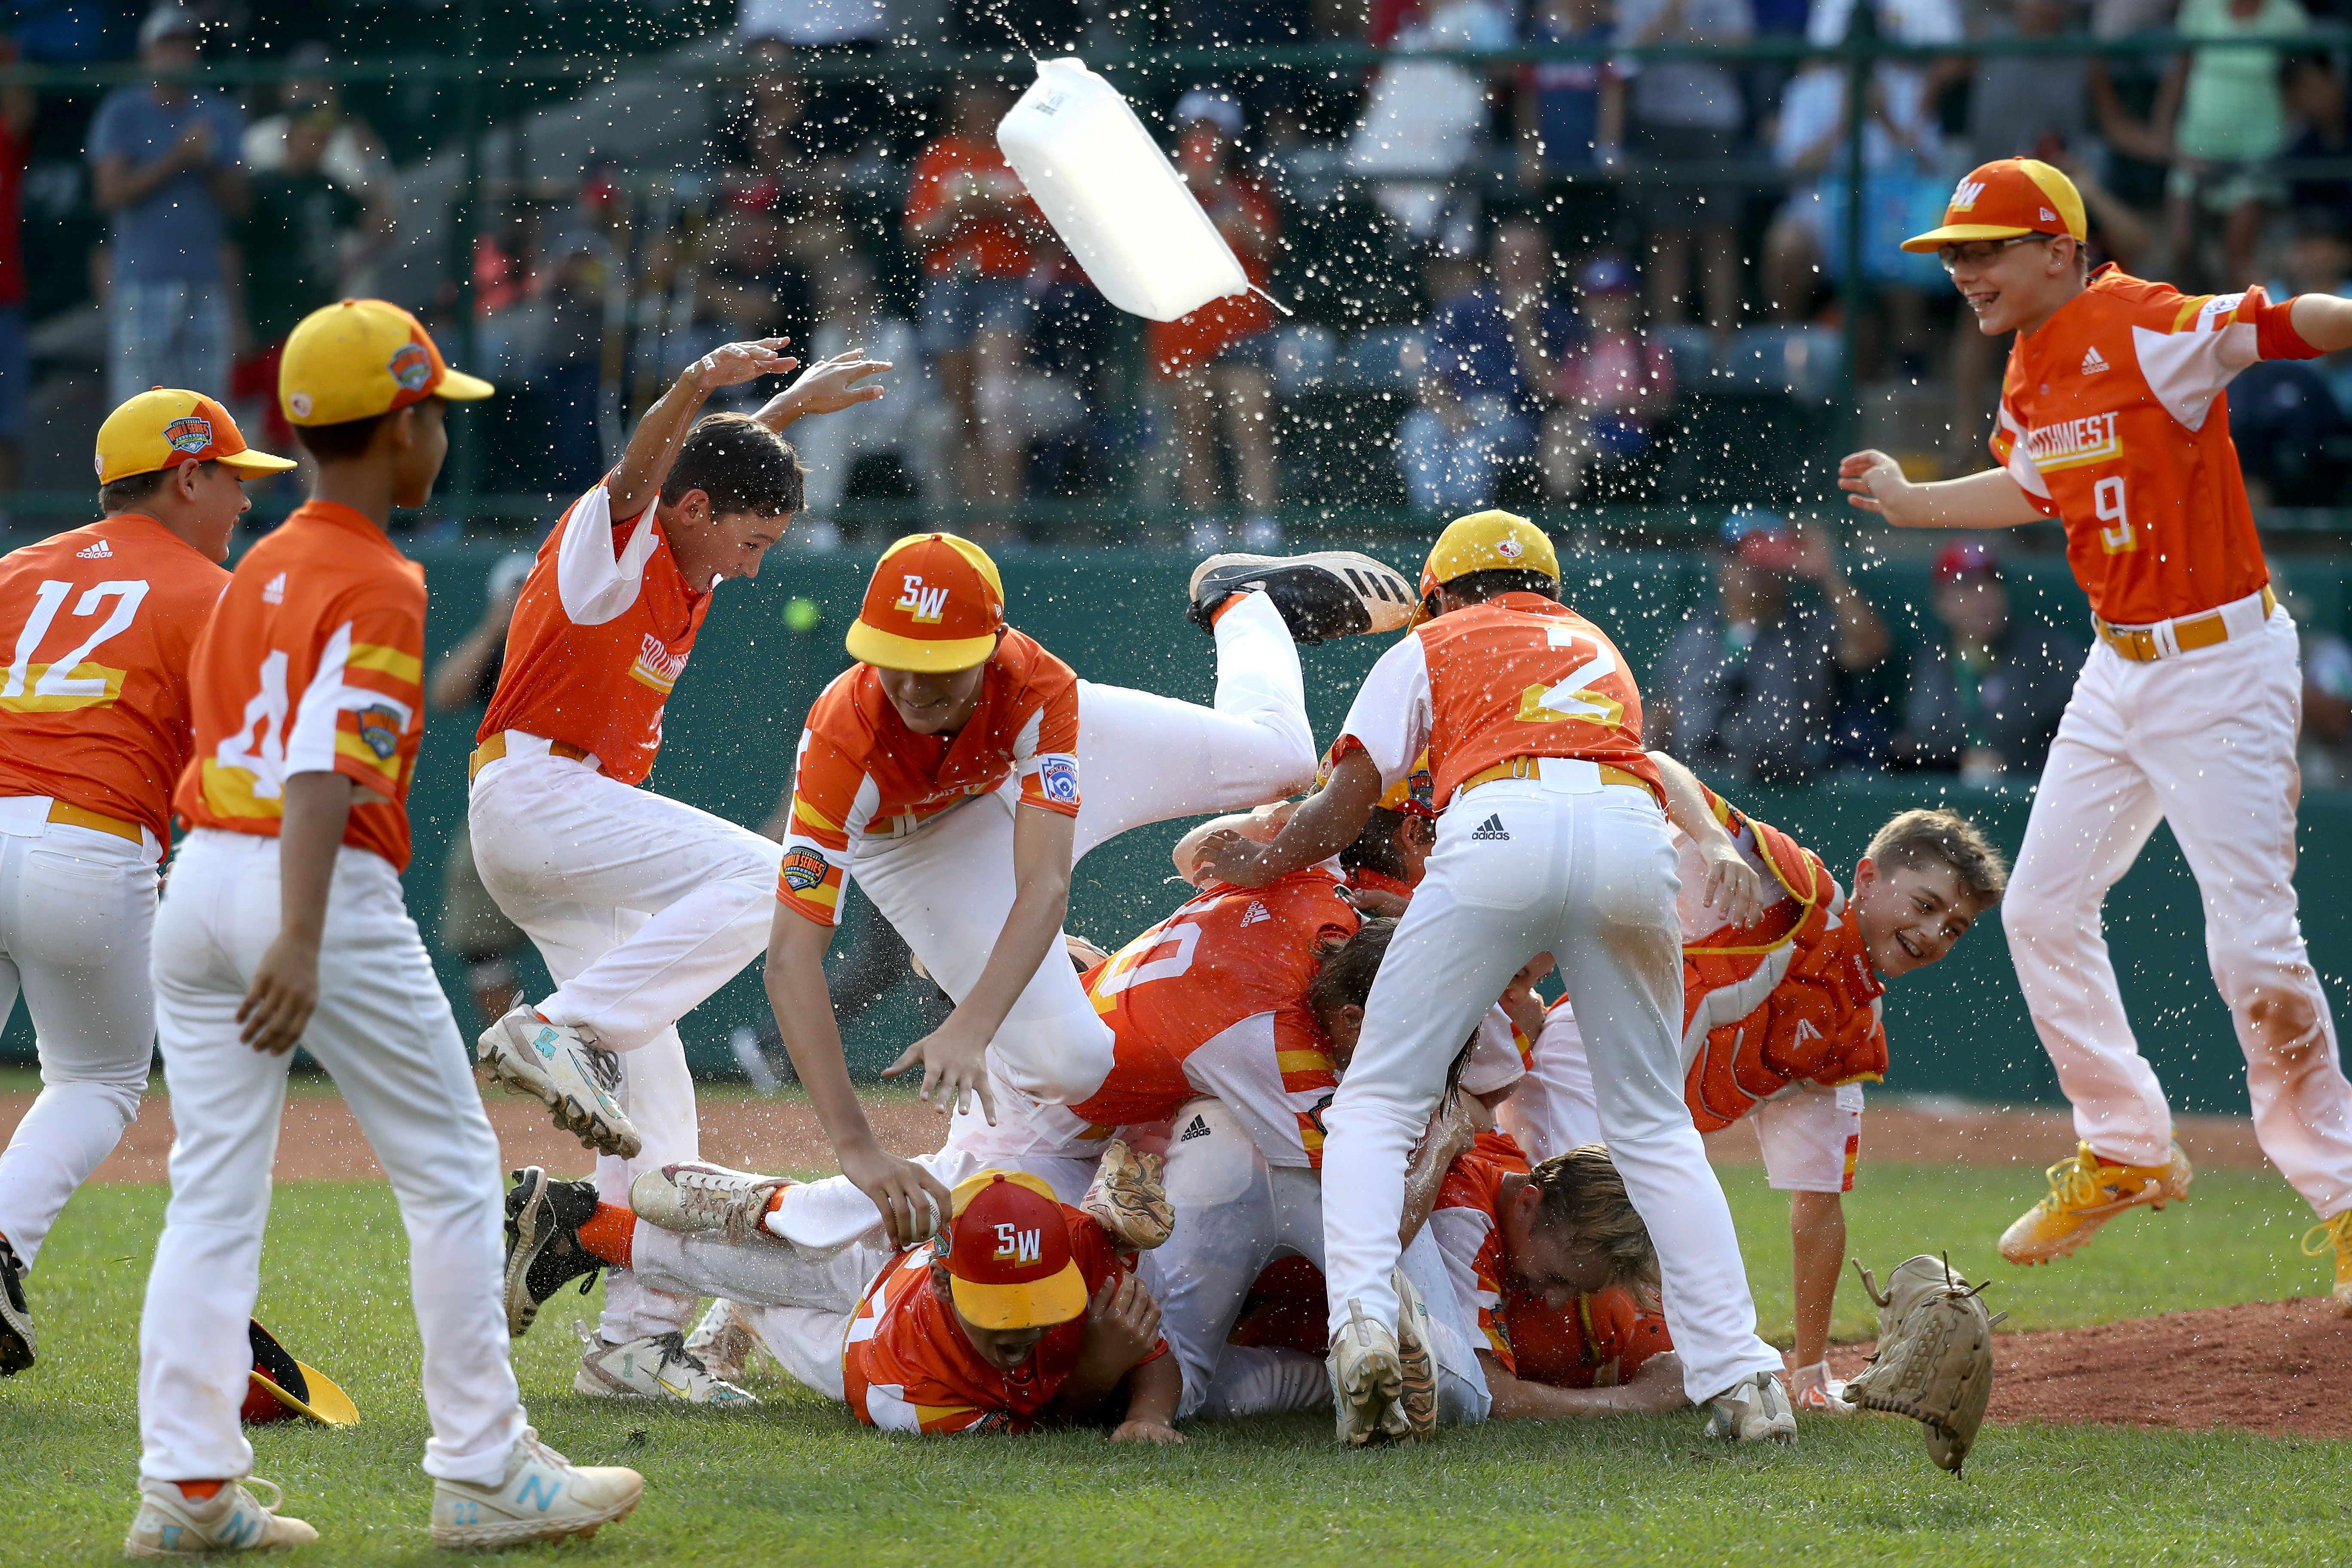 Louisiana blanks Curacao to win first Little League World Series title